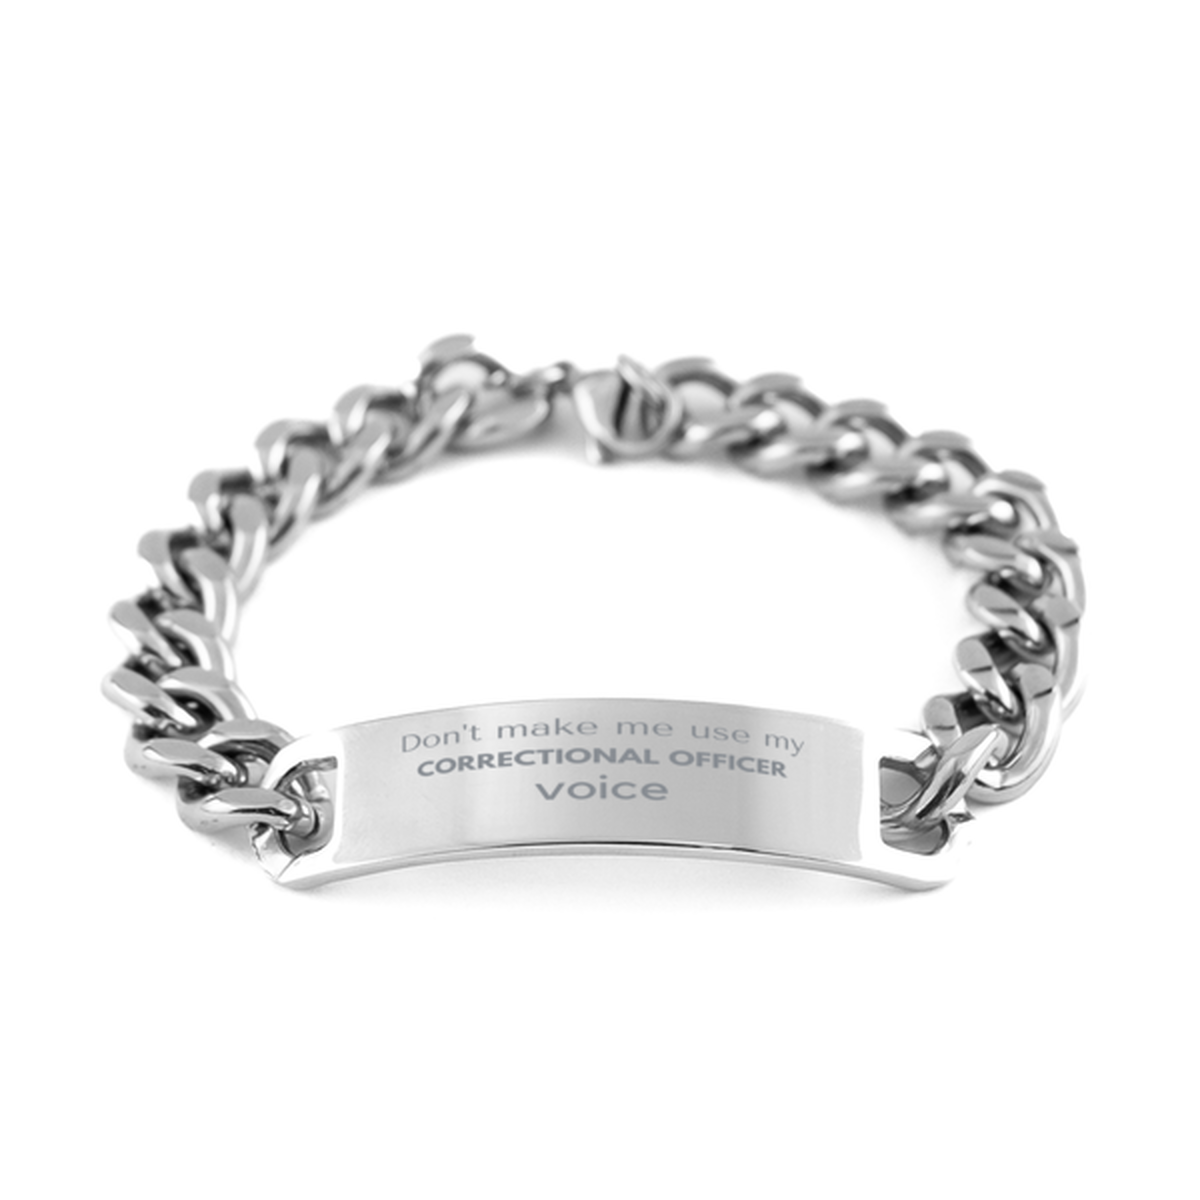 Don't make me use my Correctional Officer voice, Sarcasm Correctional Officer Gifts, Christmas Correctional Officer Cuban Chain Stainless Steel Bracelet Birthday Unique Gifts For Correctional Officer Coworkers, Men, Women, Colleague, Friends